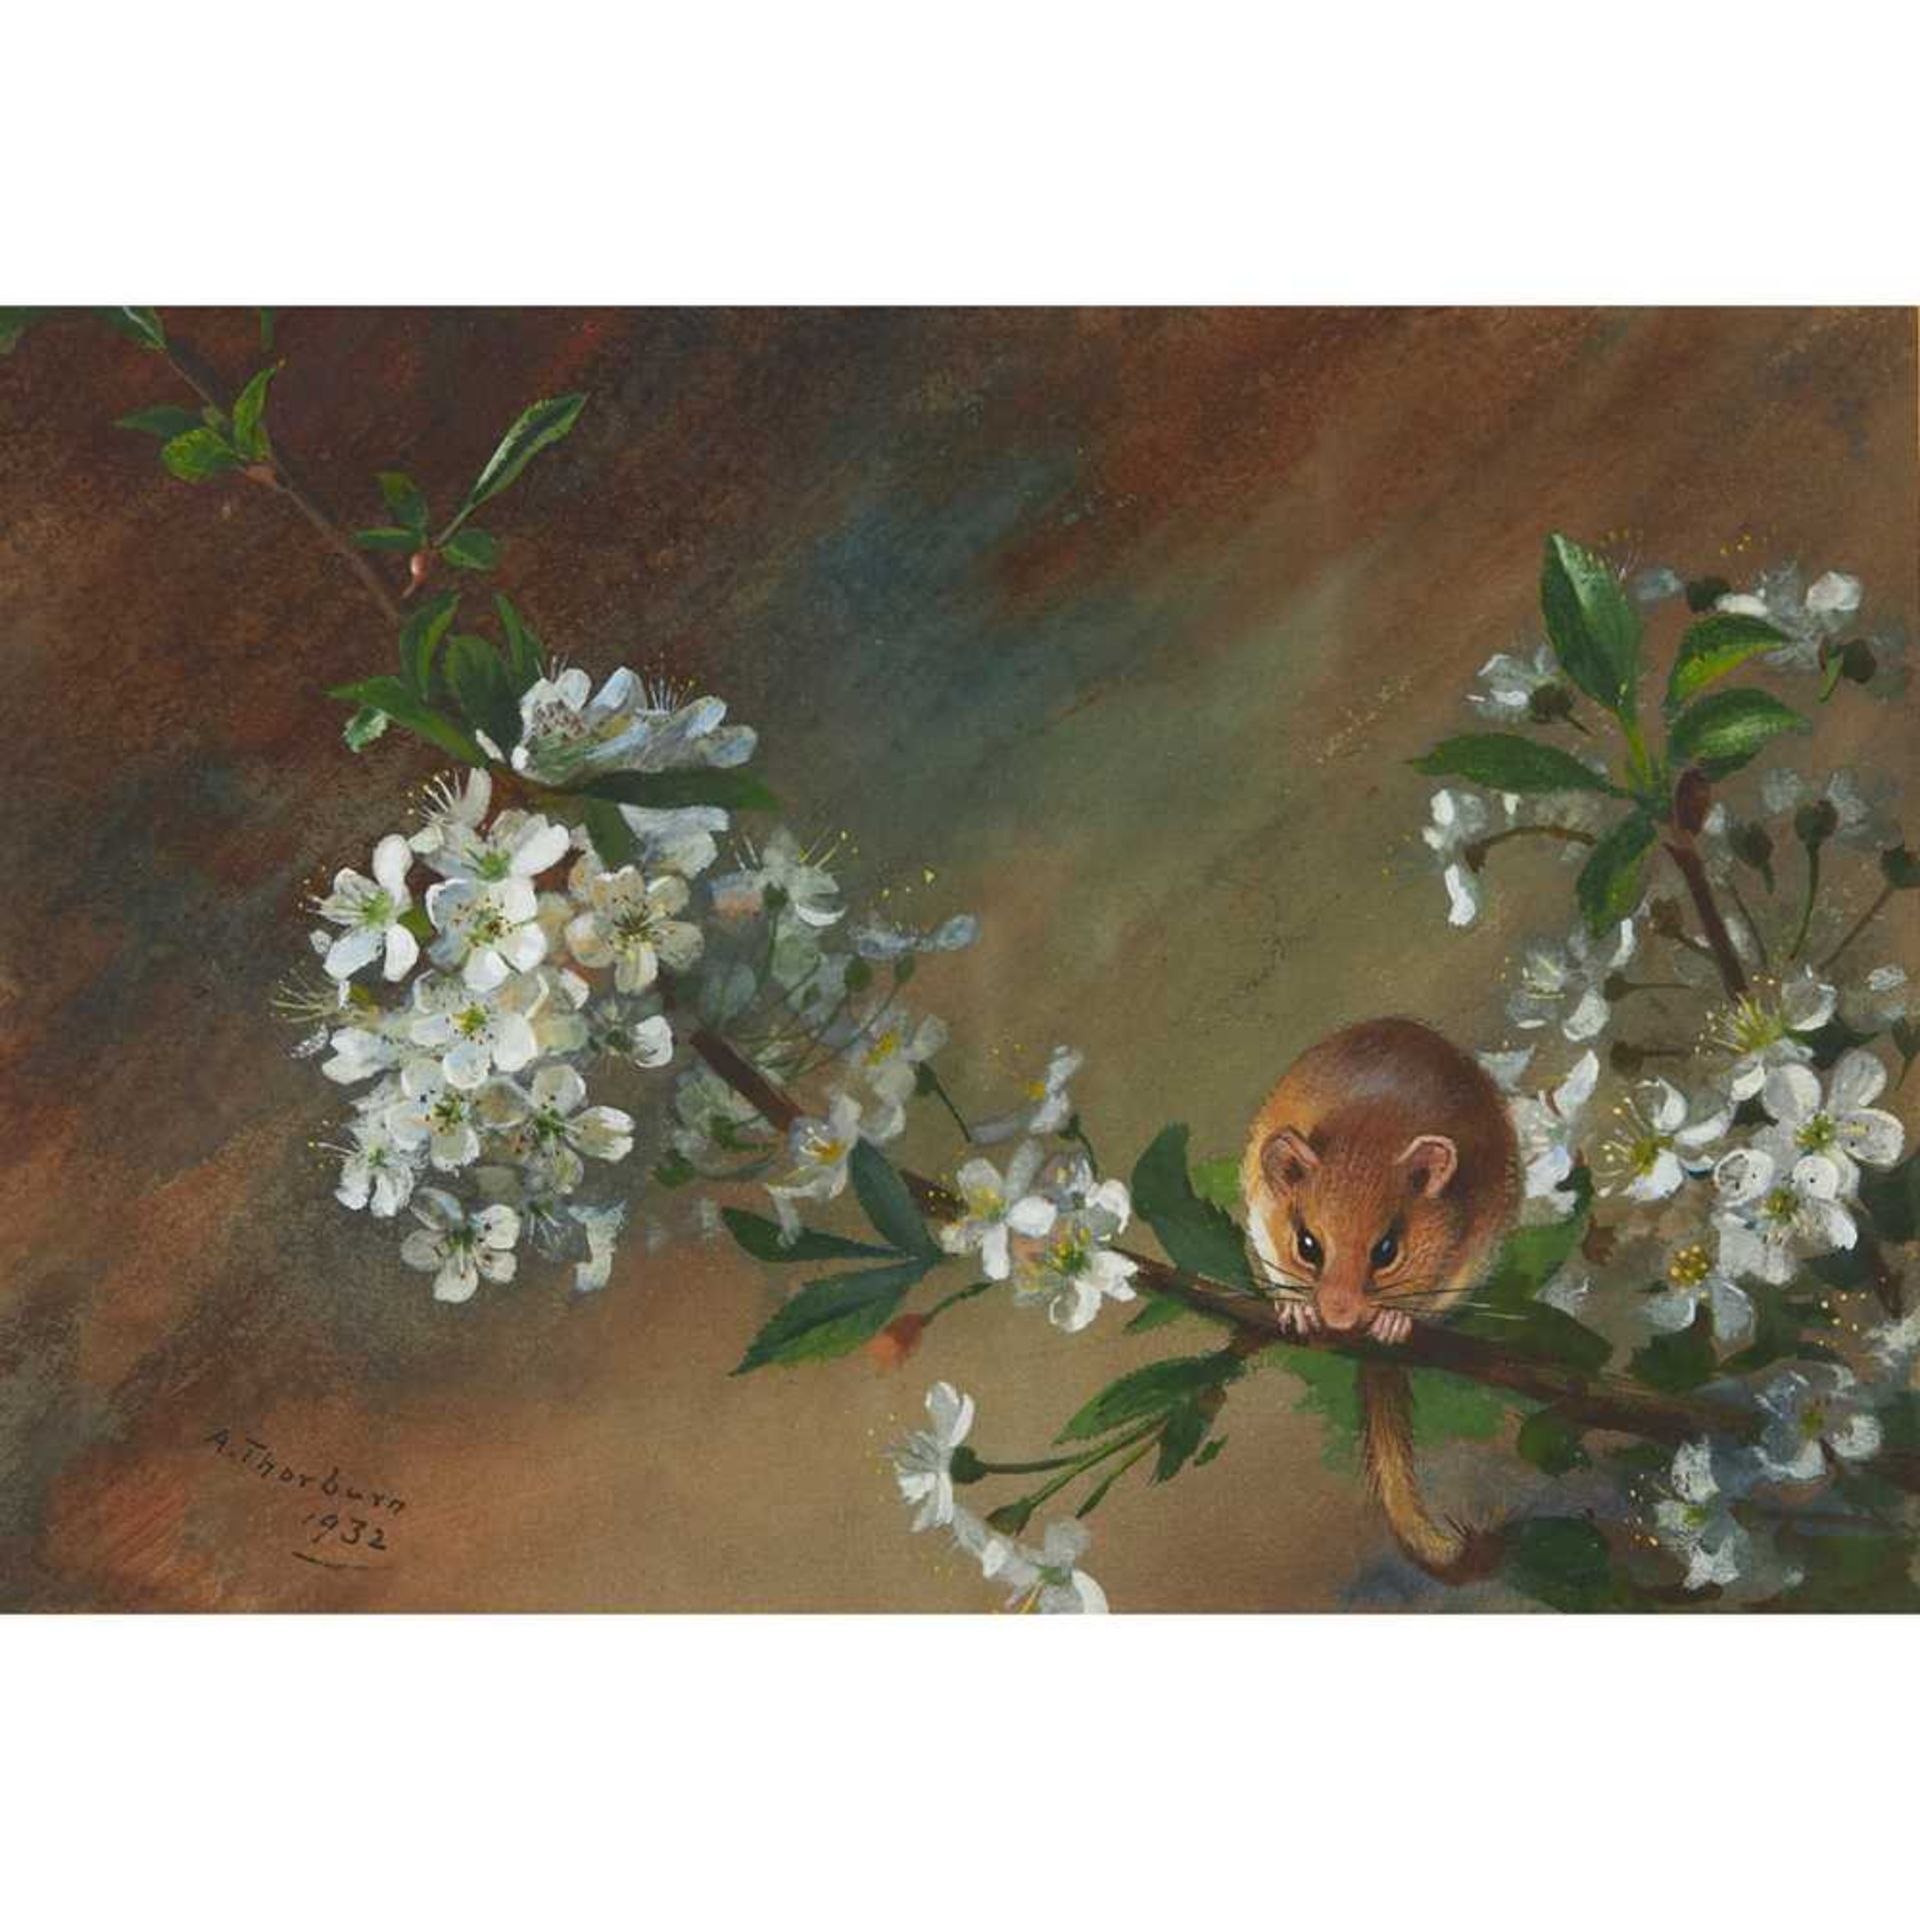 ARCHIBALD THORBURN (SCOTTISH 1860-1935) FIELD MOUSE AND BLOSSOM